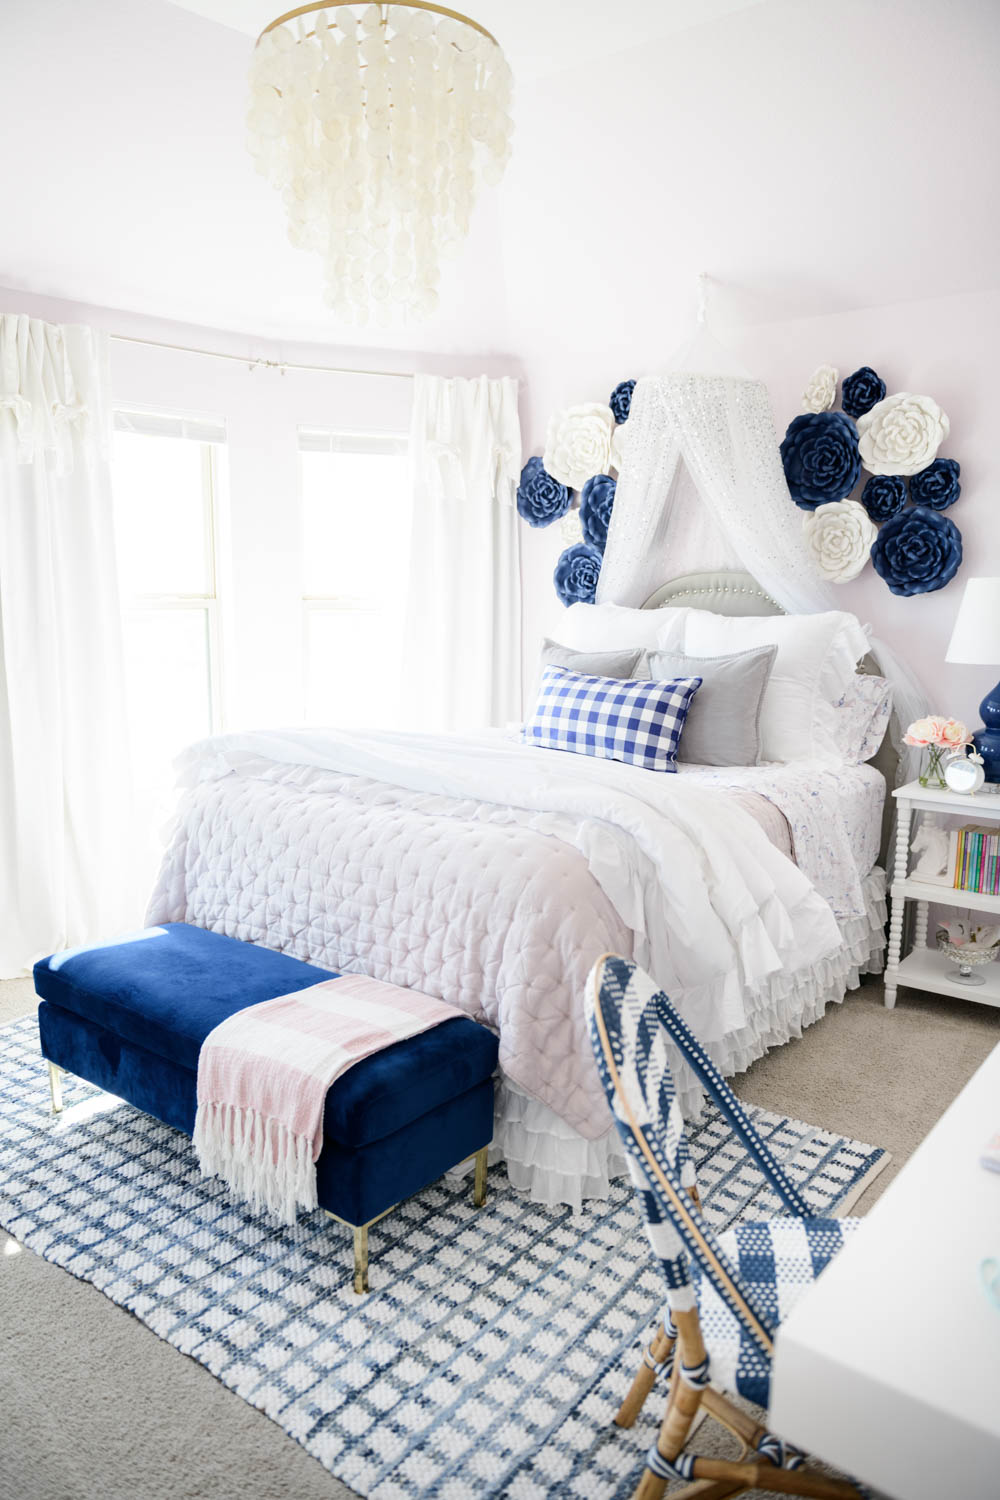 Lilac colored walls and blue and white flowers on the wall above the bed